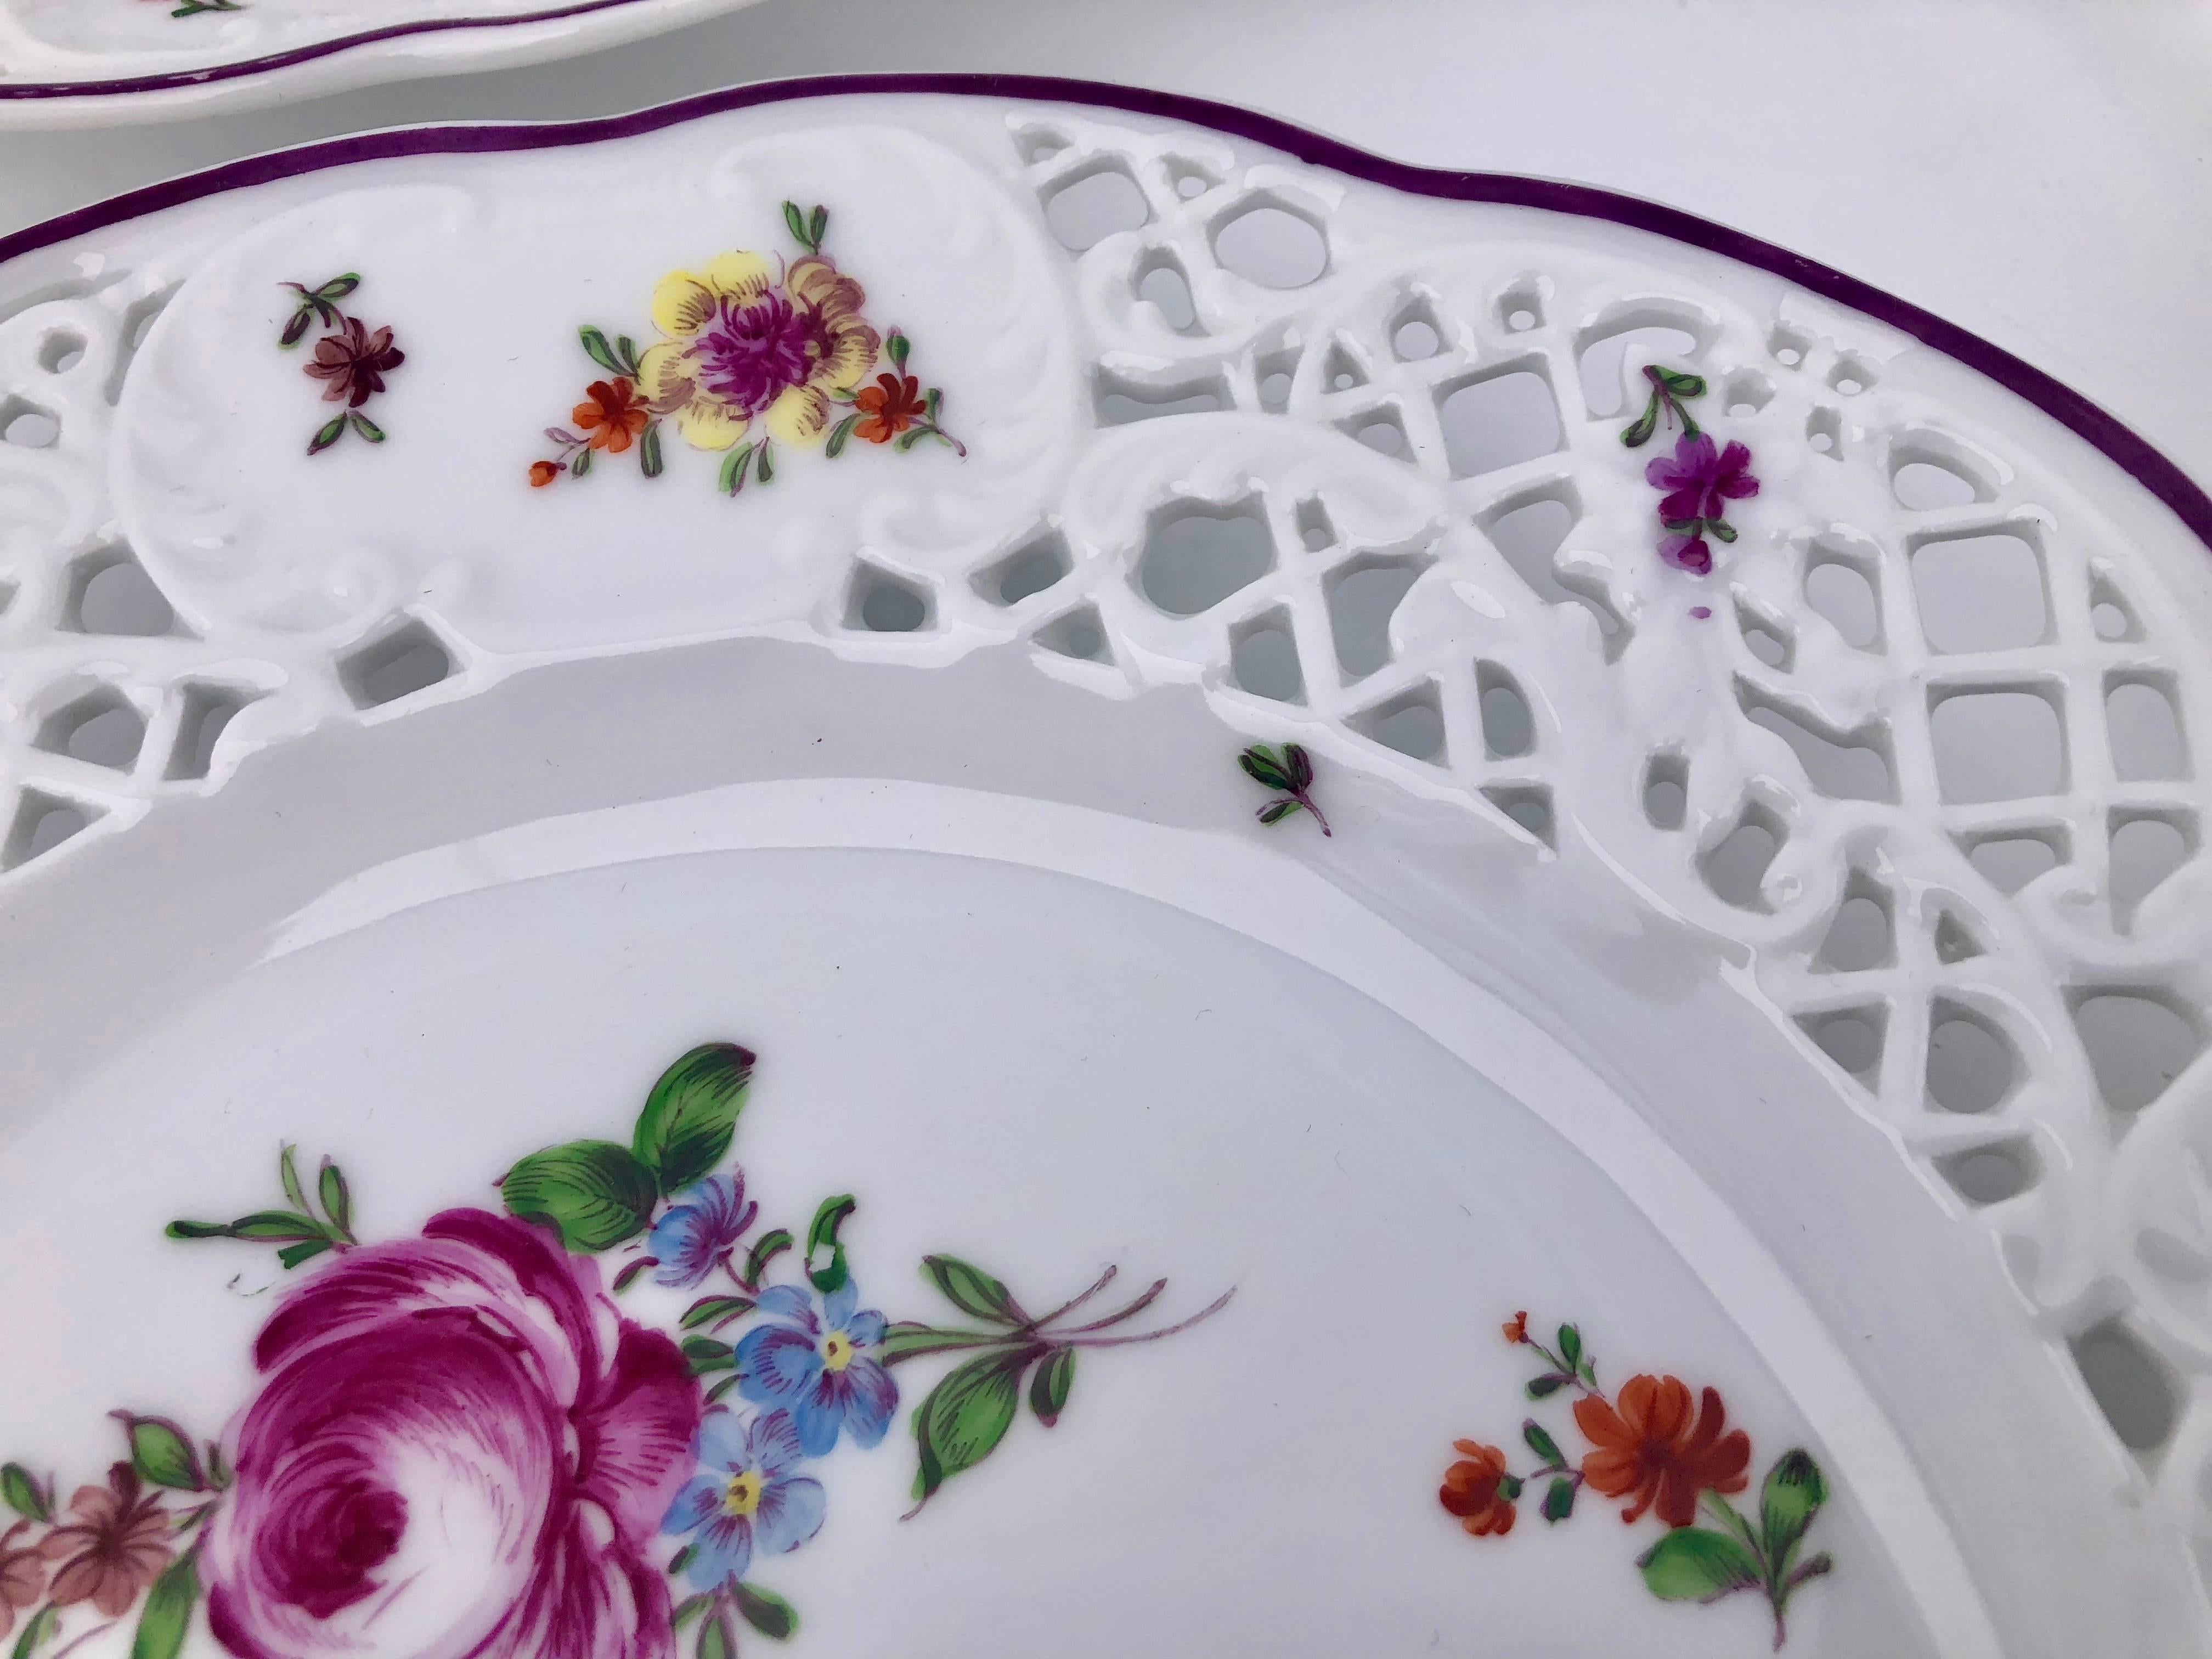 24 Meissen Plates with Reticulated Borders and Floral Decoration, Early 1900s im Angebot 3